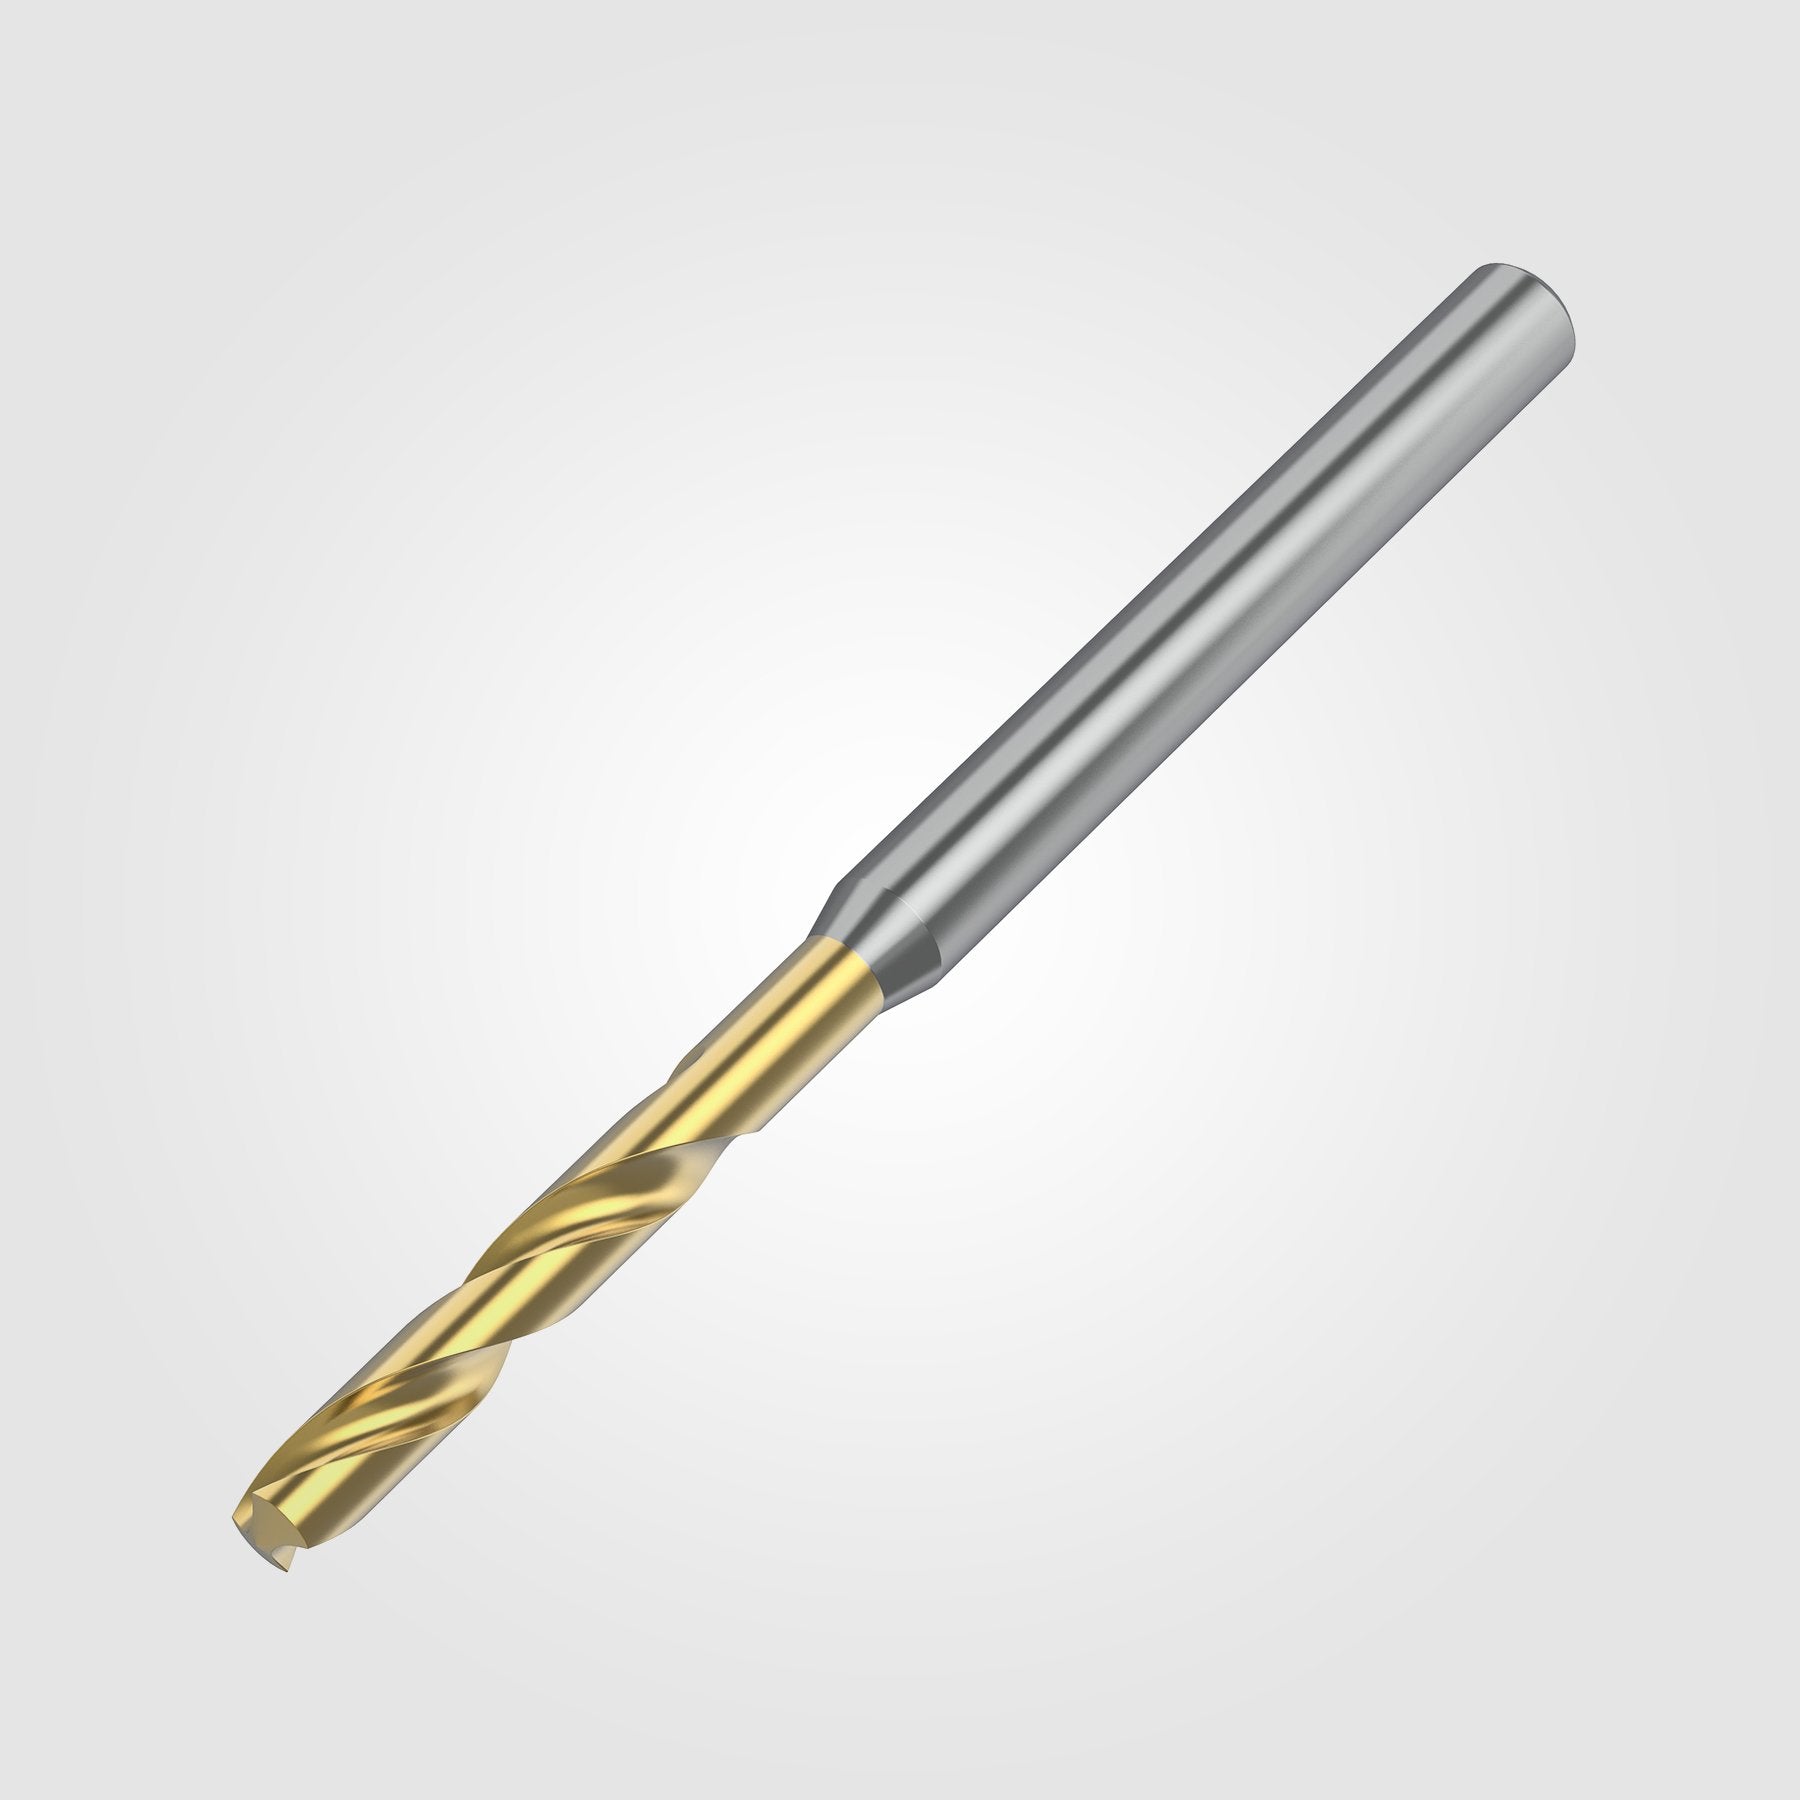 GOdrill (THROUGH COOLANT) | 9.7mm / .3819" / 5xD | SOLID CARBIDE DRILL | 4149276